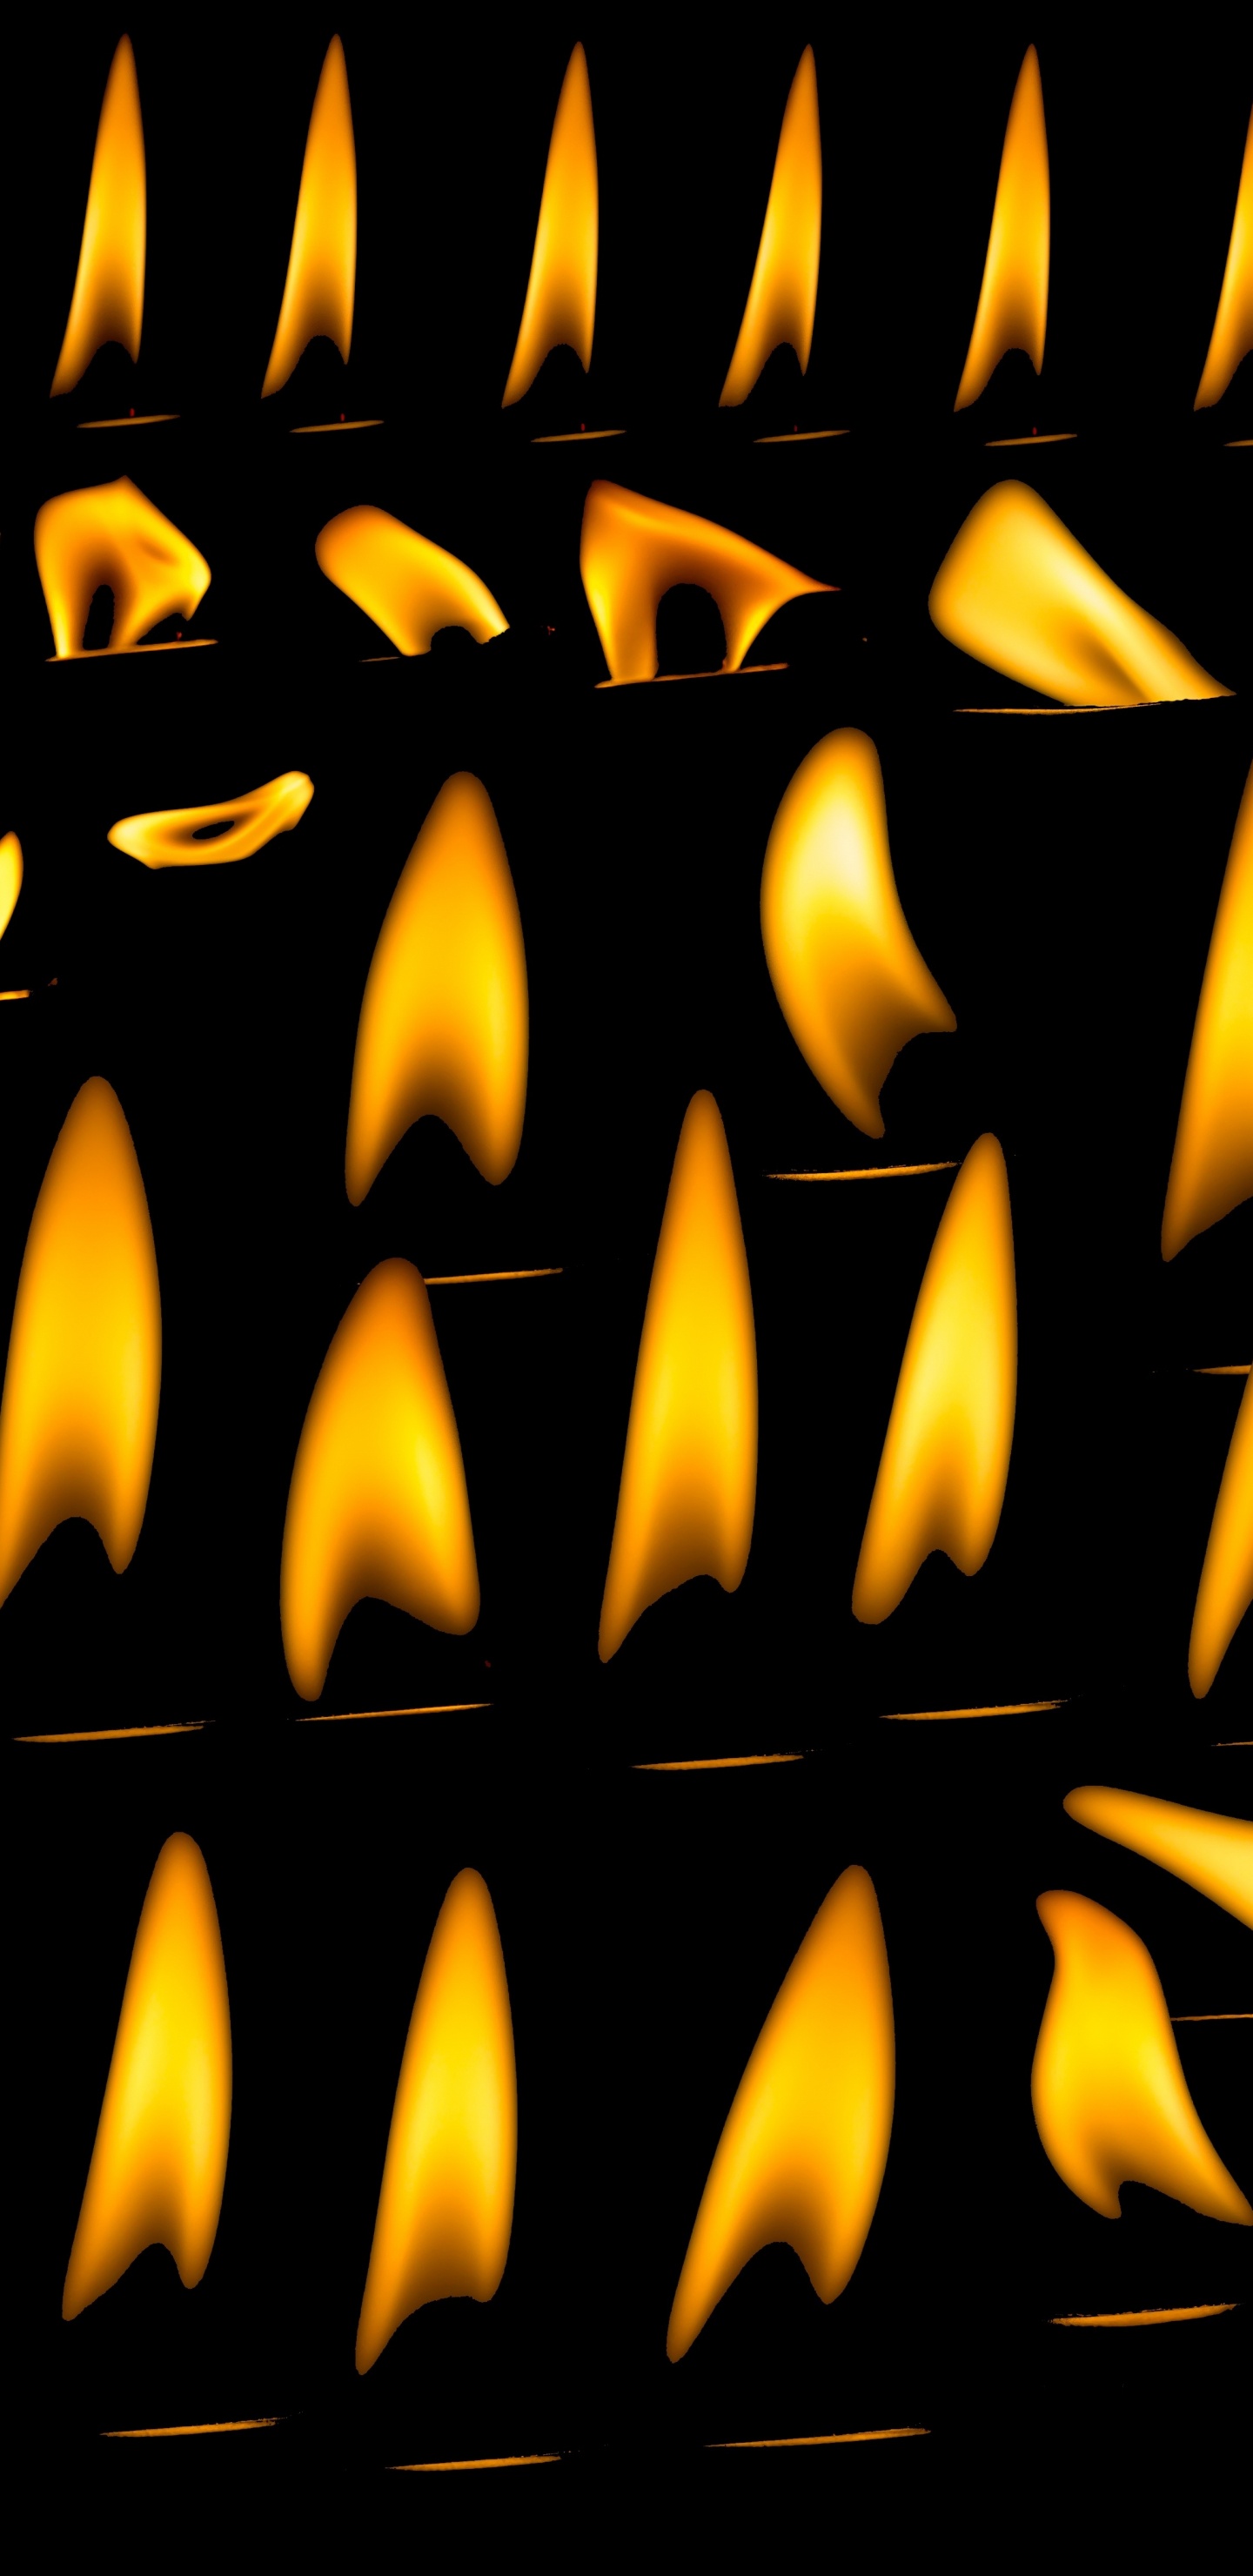 Yellow and Black Metal Frame. Wallpaper in 1440x2960 Resolution